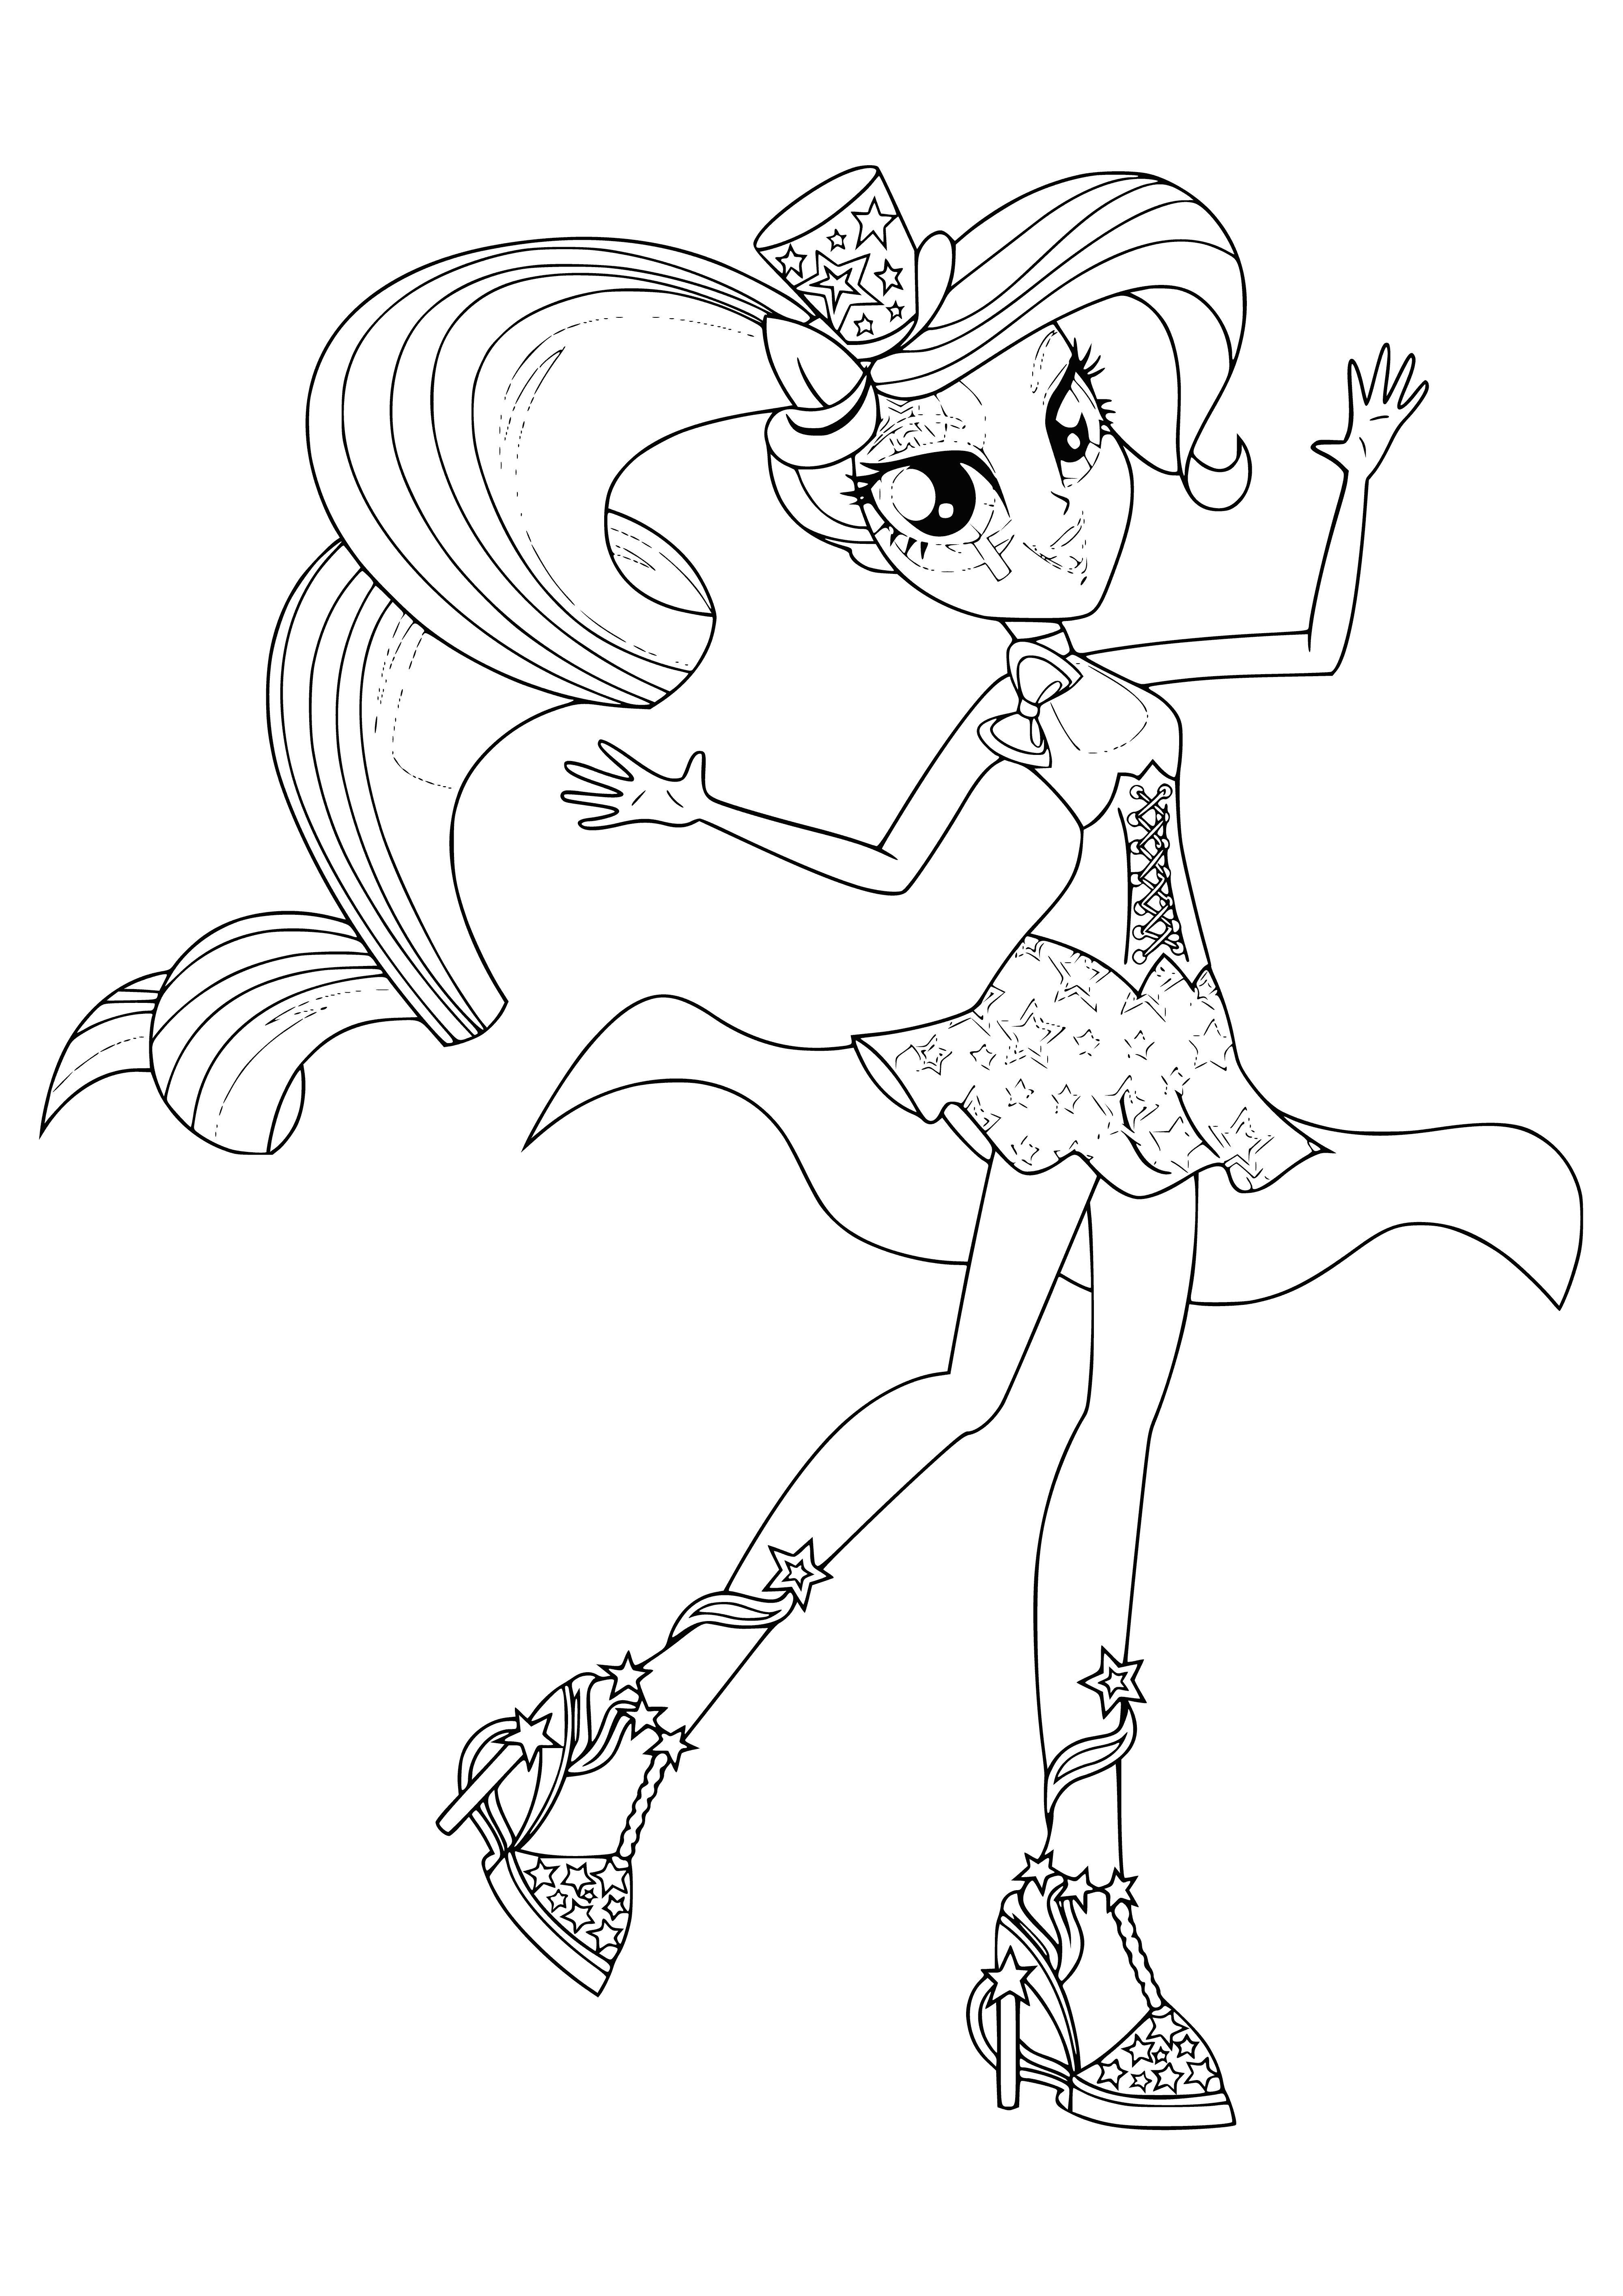 coloring page: Girl in sleeveless shirt w/ rainbow and blue skirt plays guitar w/ mic & amp on stage in front of crowd.